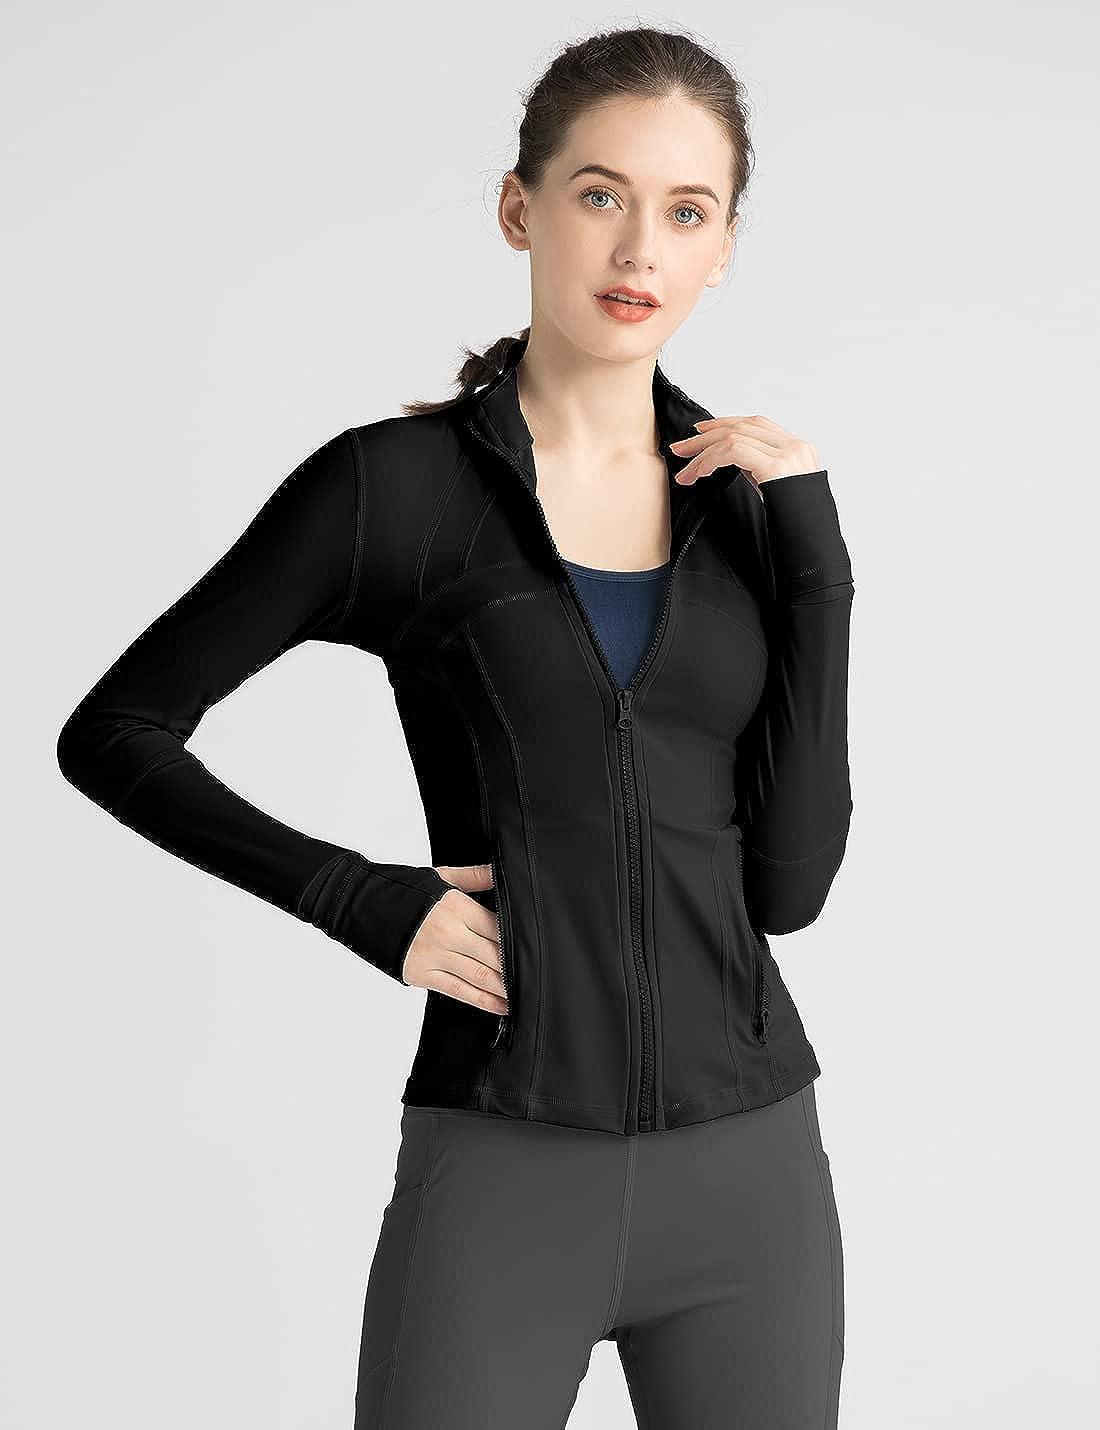 Gacaky Women's Slim Fit Workout Running Track Jackets Full Zip-up Yoga Athletic  Jacket with Thumb Holes Black X-Small